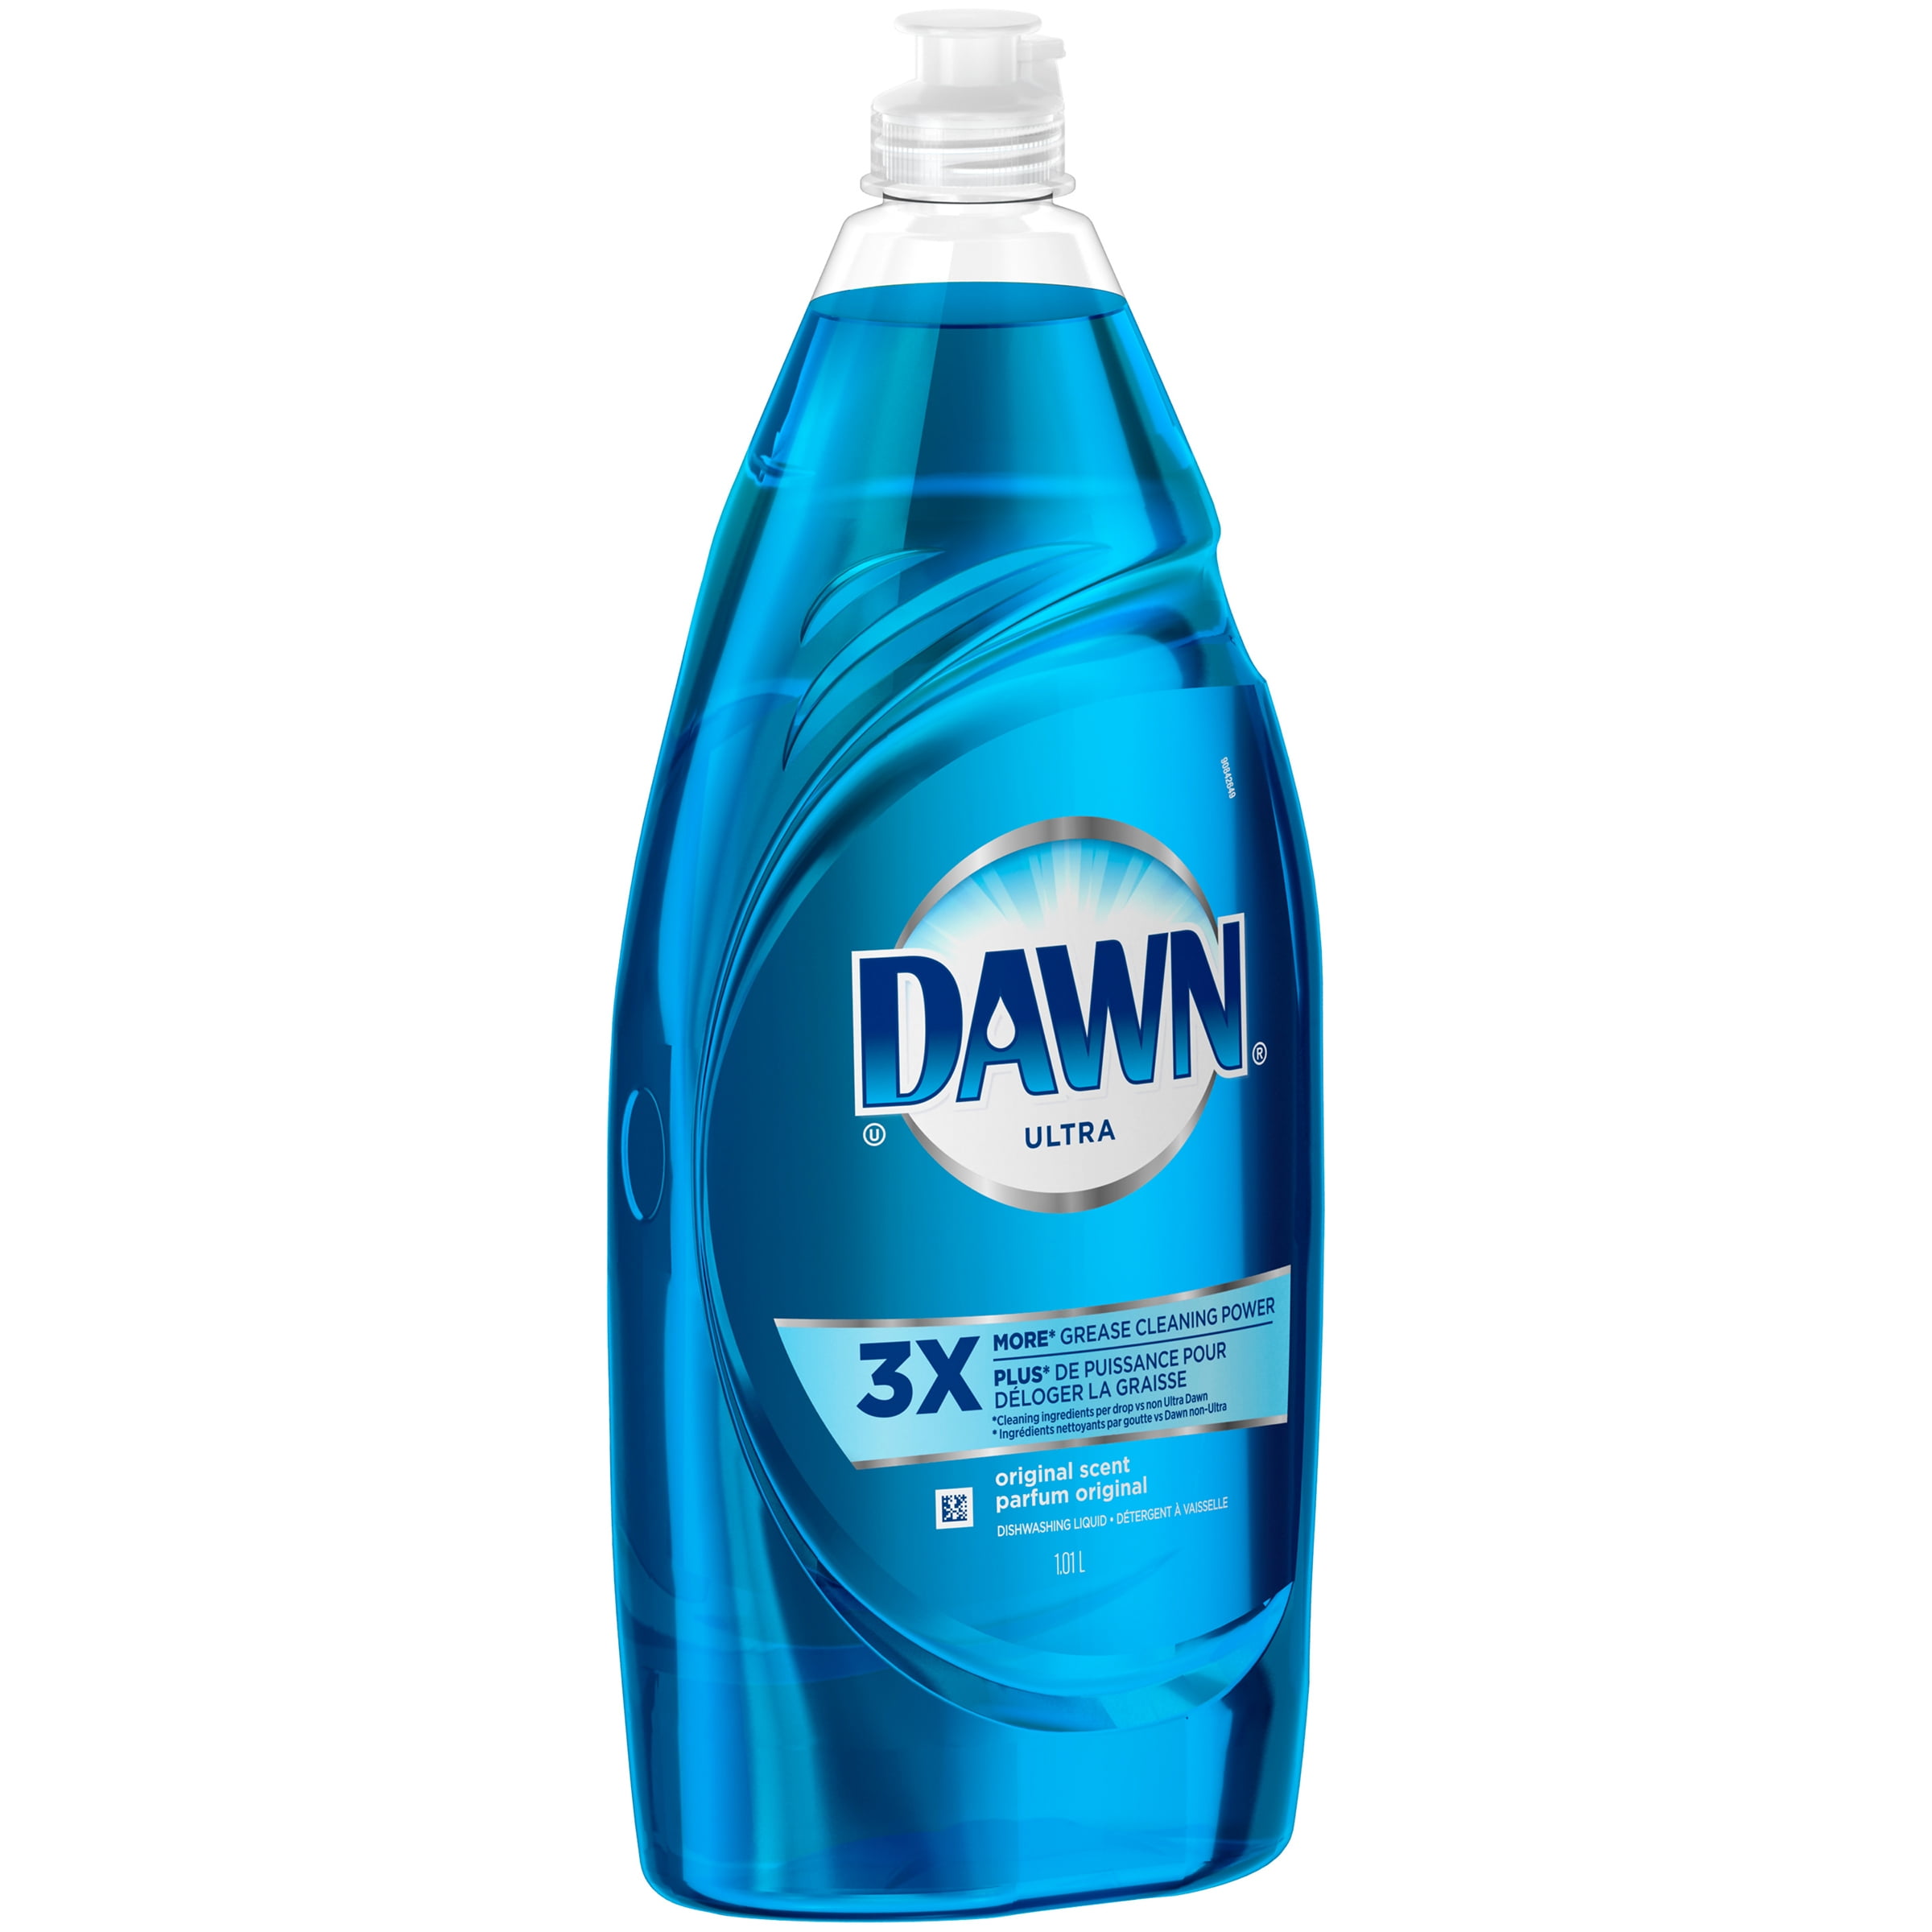 What are some of the ingredients found in Dawn dish soap?